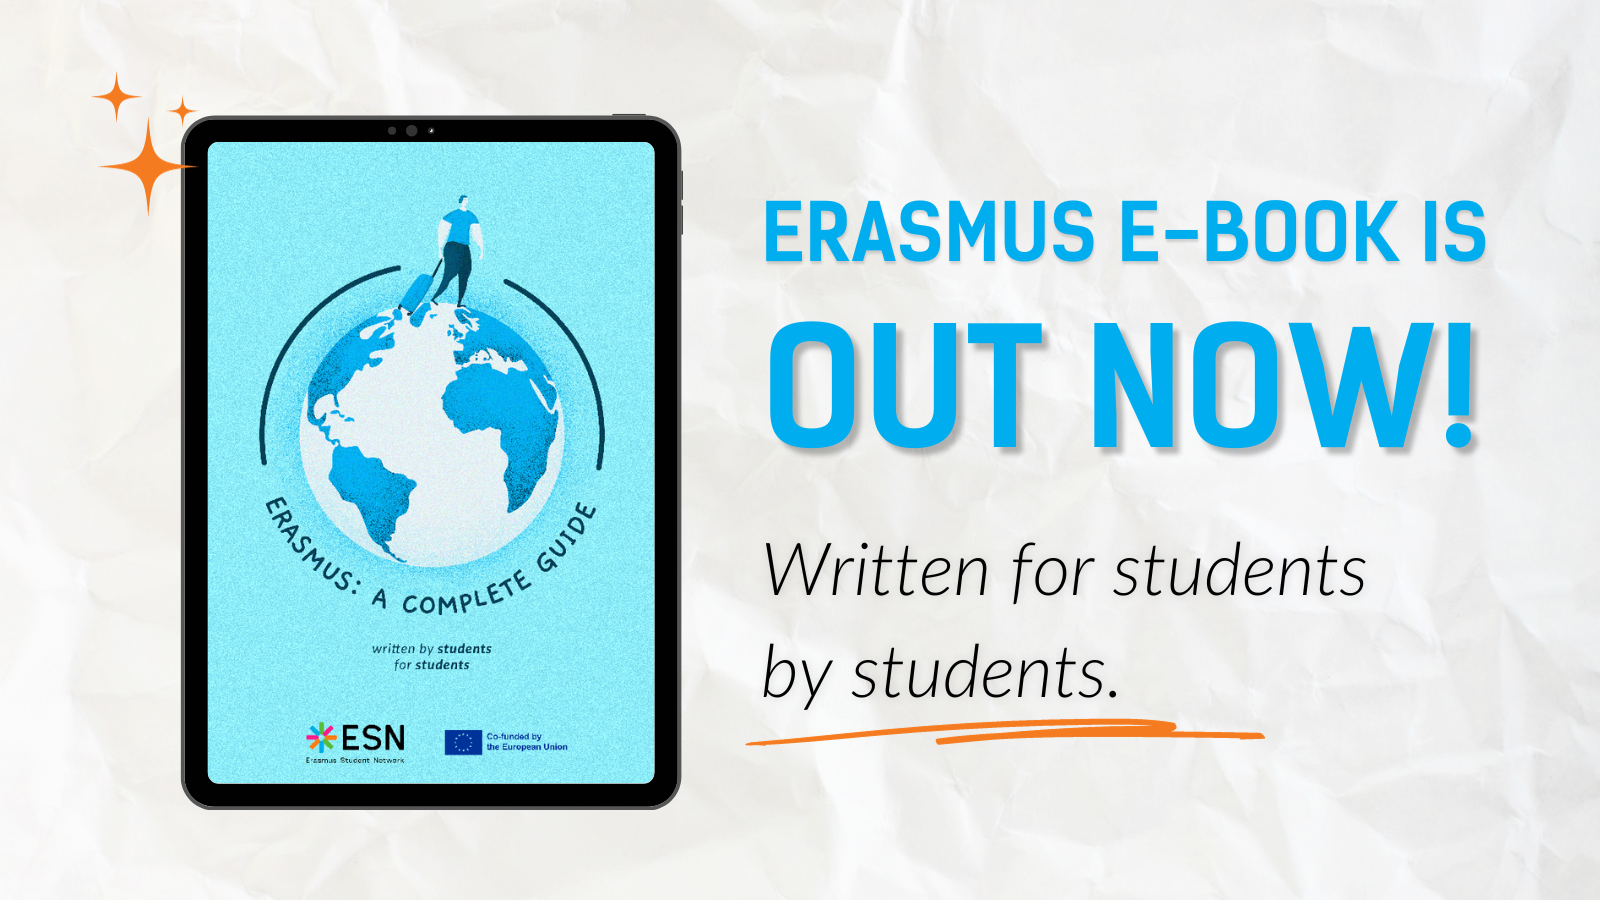 Erasmus E-book is out now! Written by students for students.